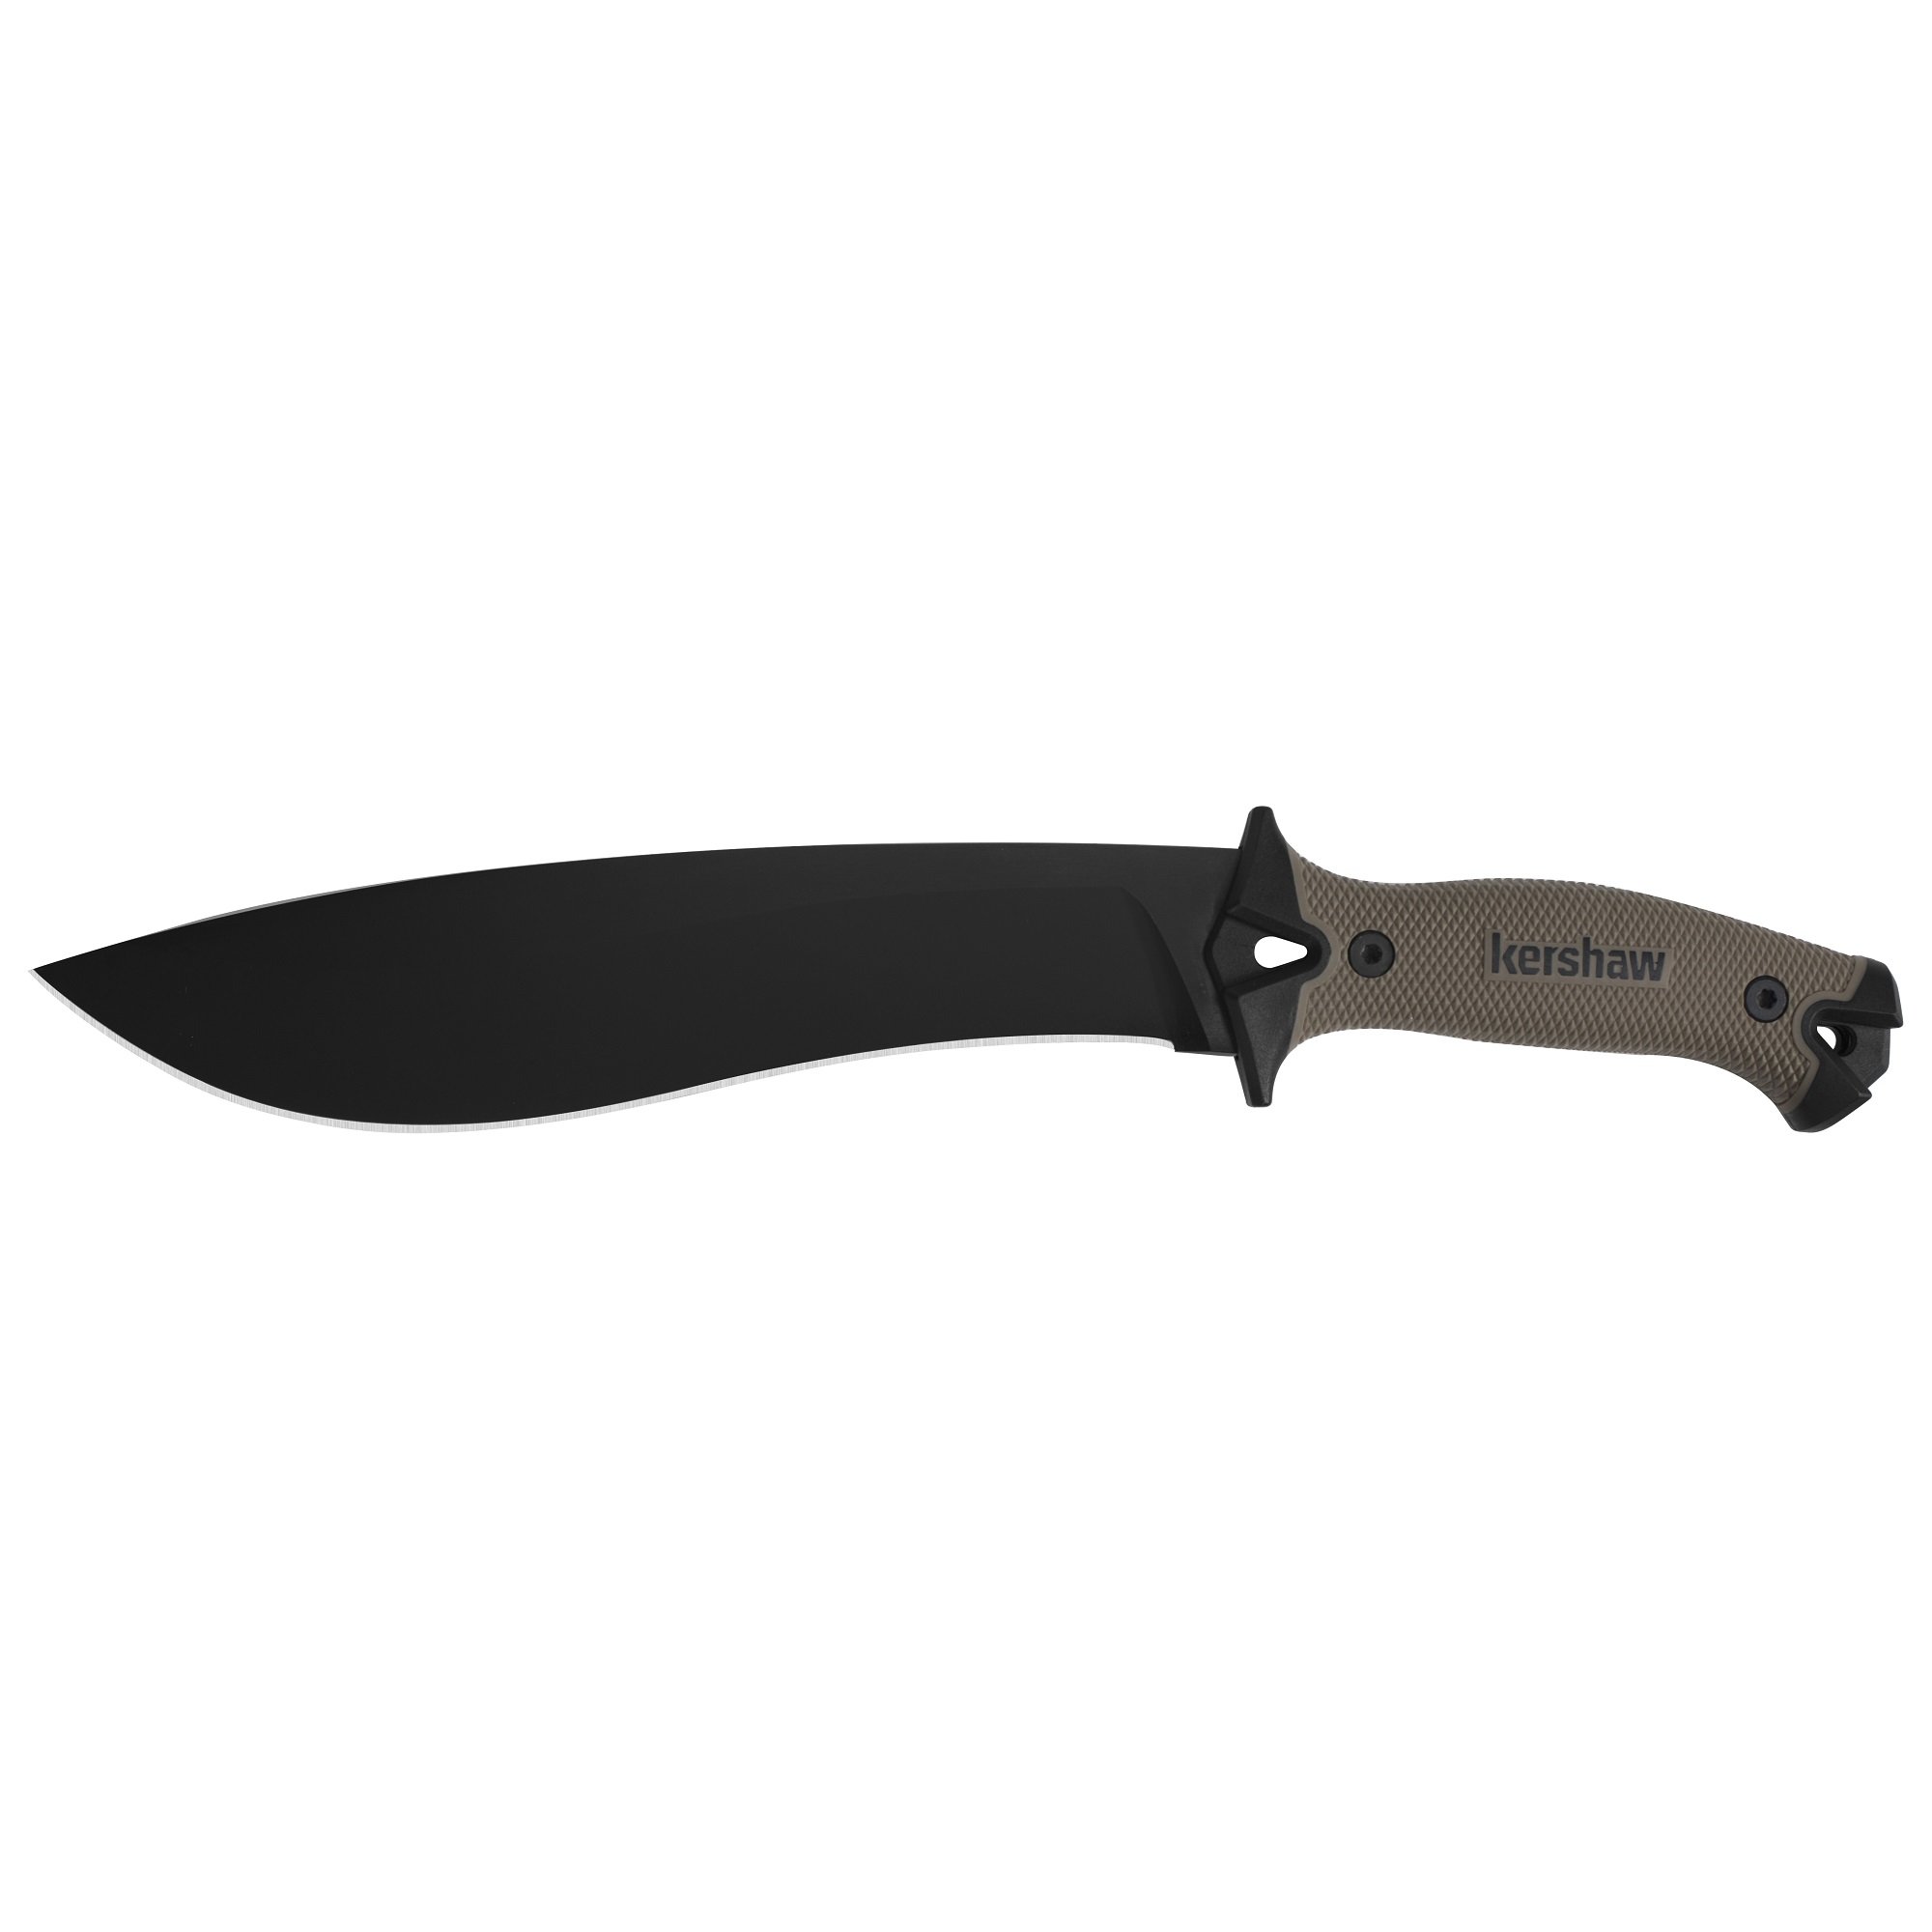 Kershaw Camp 10 - Tan Machete, Fixed Blade Knife, 10-in. 65Mn Carbon Steel Blade Includes Sheath, Camp Series Machete, Outdoor and Survival Tool